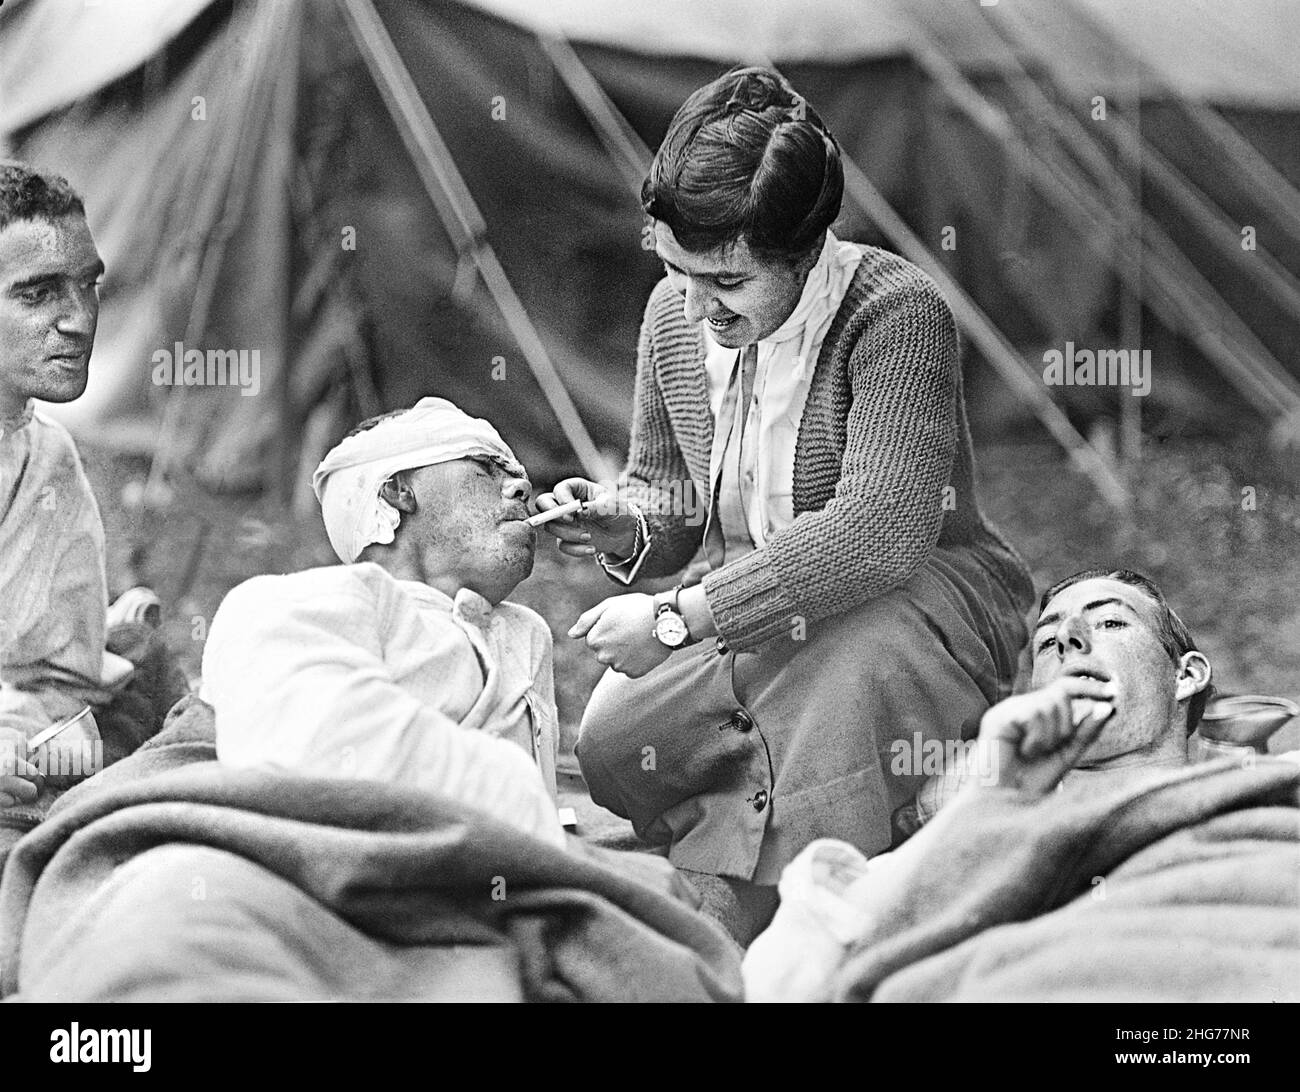 Miss Anna Rochester of Buffalo, New York, USA, lighting Cigarette for Private Ernest Stanback, of 165th Infantry, Co. E., 42nd Division, American Red Cross Hospitals #6 & #7, Souilly, France, American National Red Cross Photograph Collection, March 12, 1919 Stock Photo